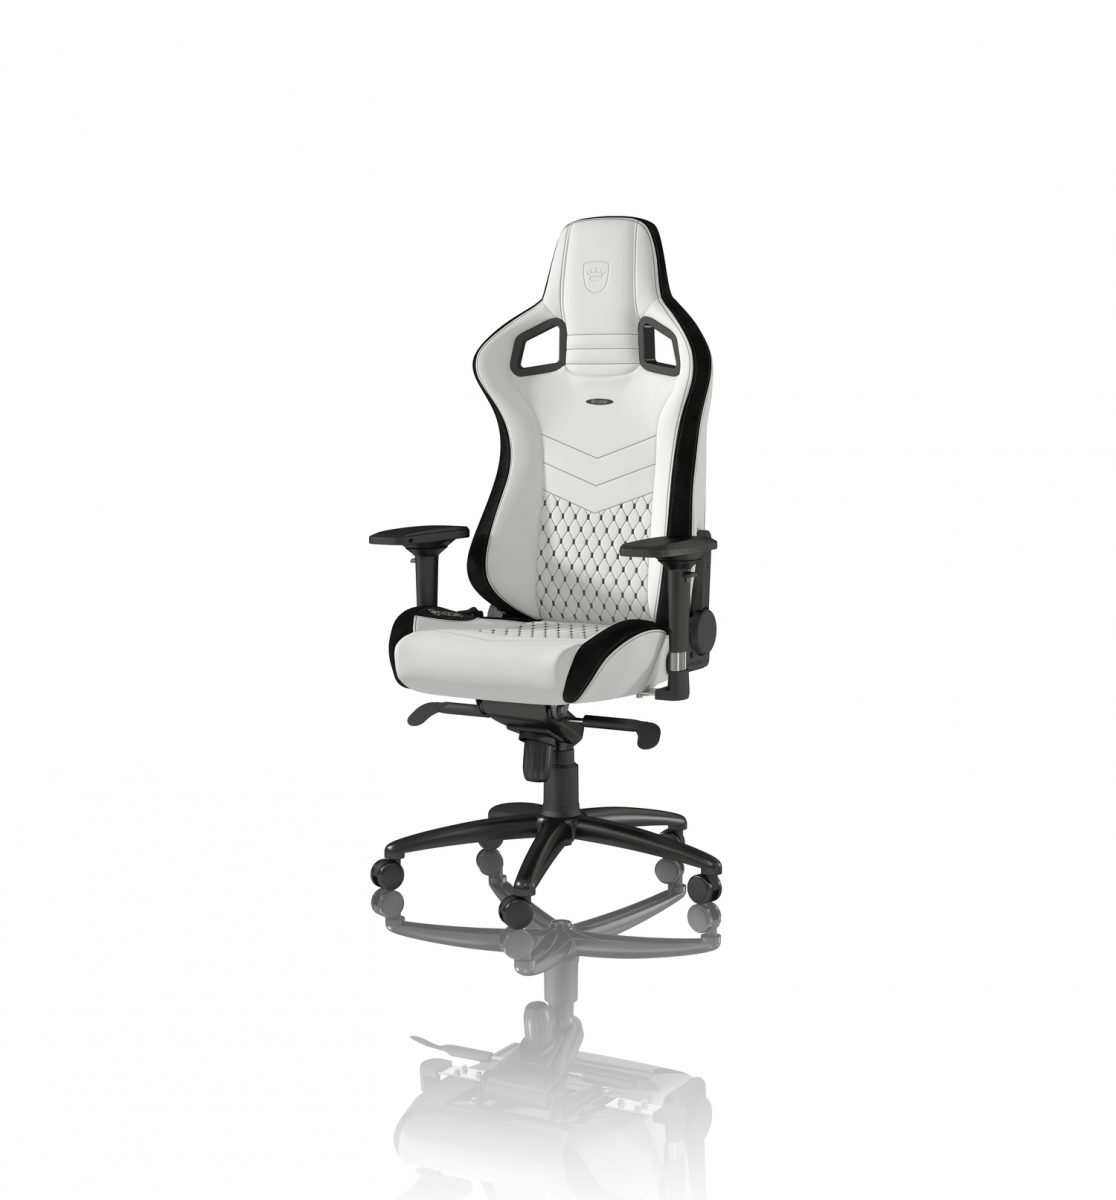 noblechairs EPIC Gaming Chair Breathable